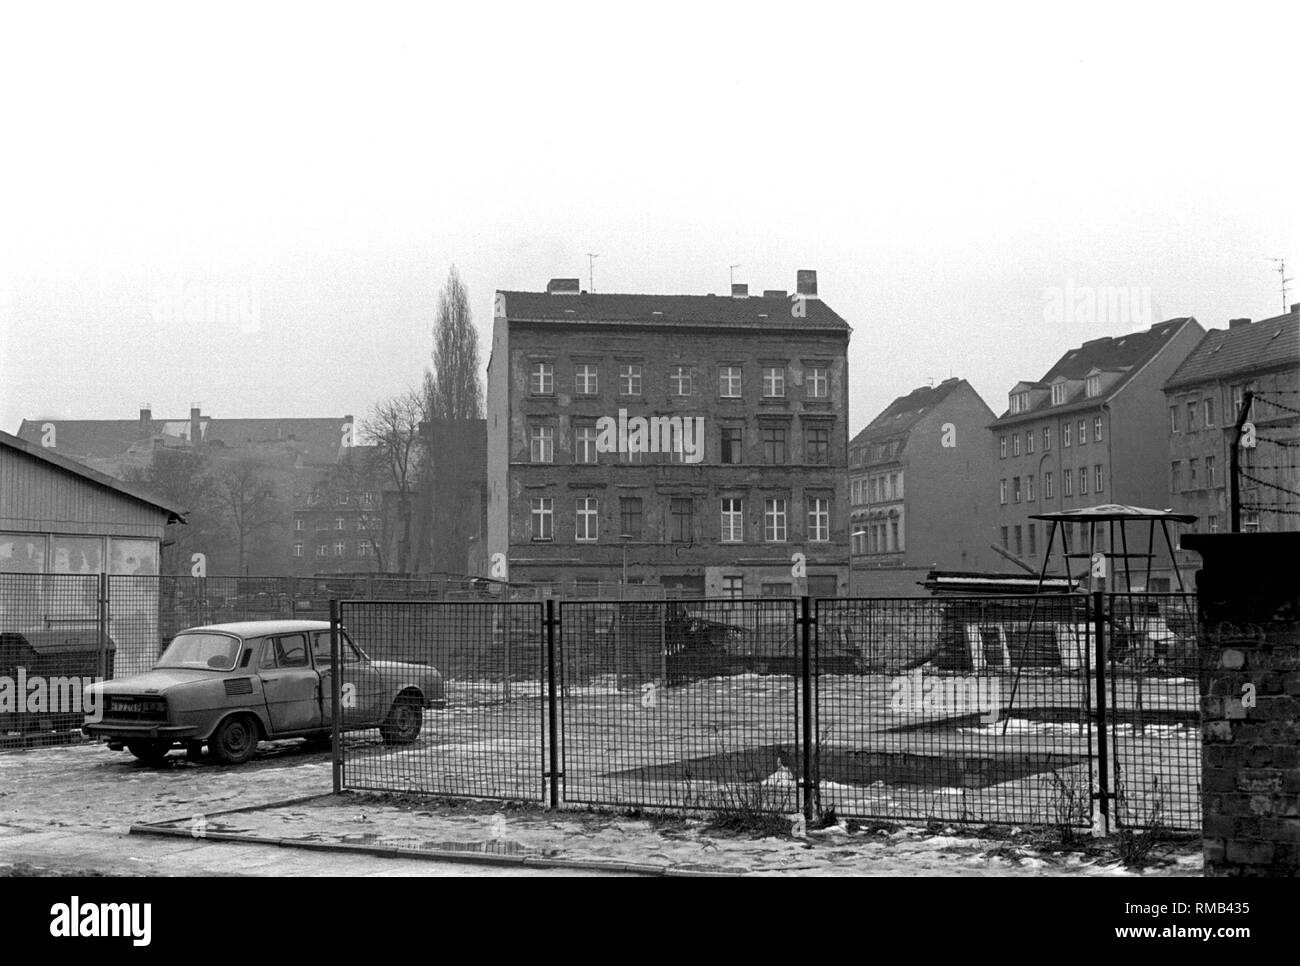 View from the Gipsstrasse to Auguststrasse (50A), Spandauer Vorstadt, (Skoda),Germany, Berlin-Mitte, 28.08.1981. Stock Photo